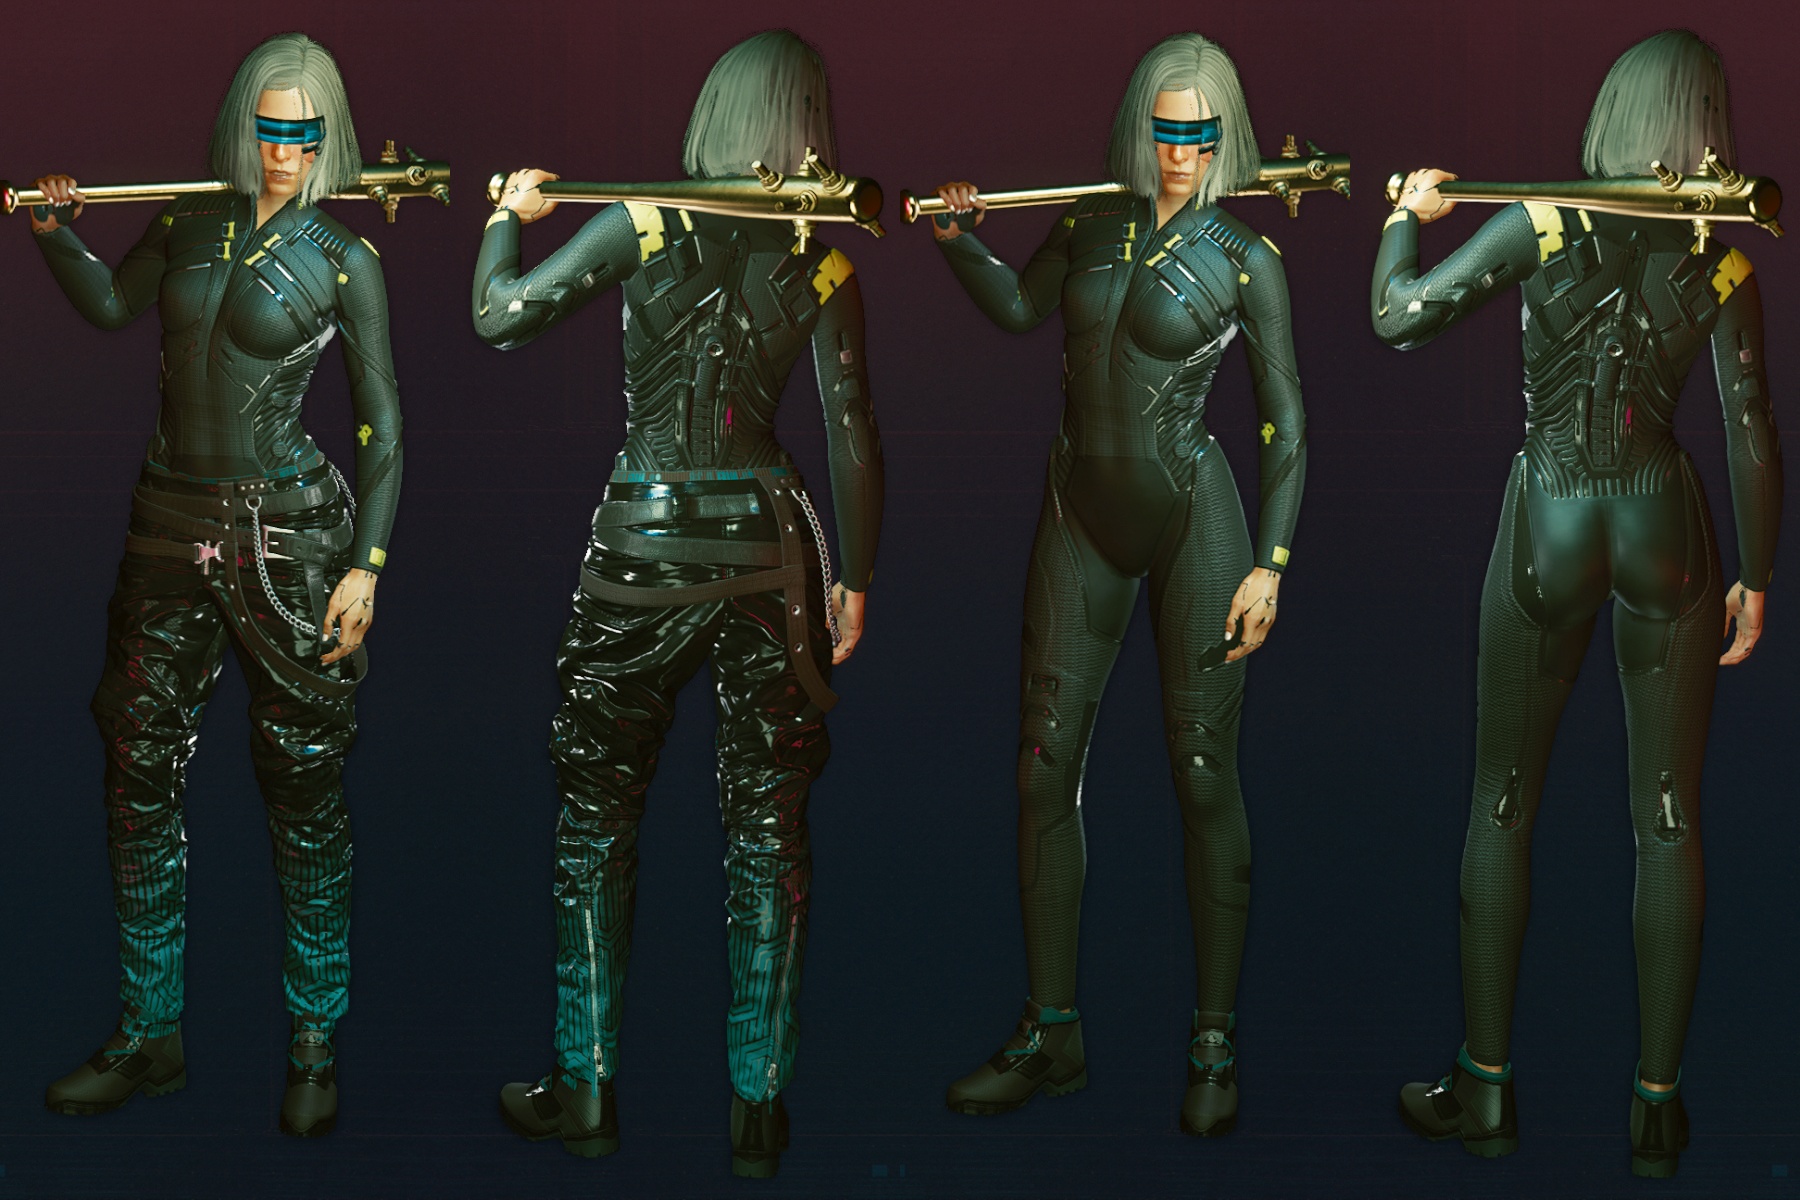 Cyberpunk 2077 How to Get Free Legendary Armor Sets - July 2021